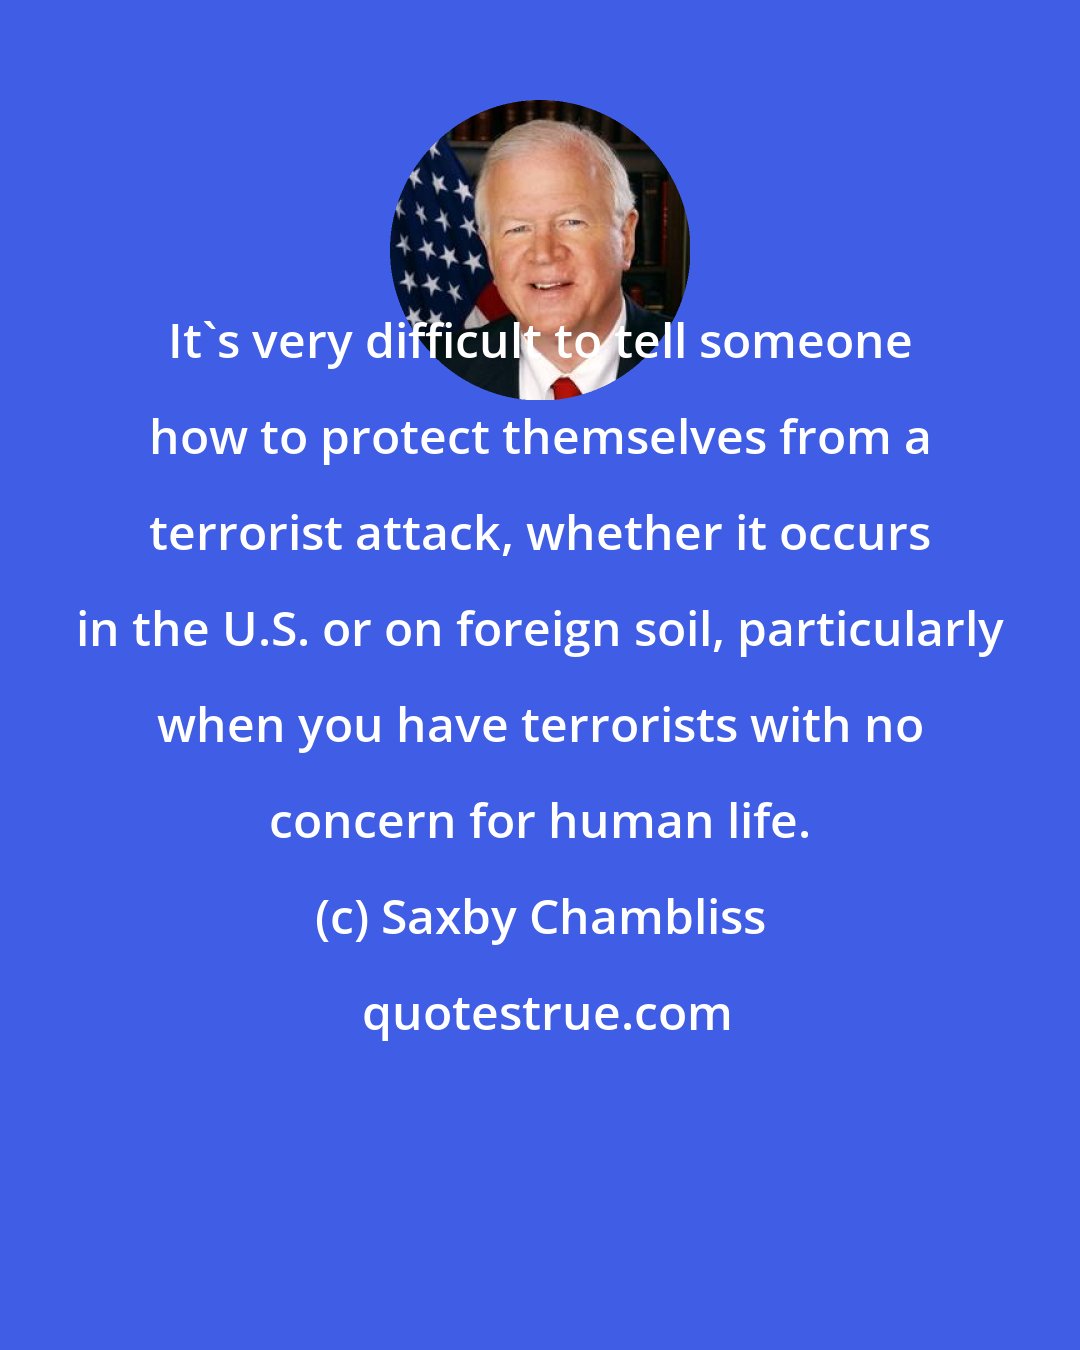 Saxby Chambliss: It's very difficult to tell someone how to protect themselves from a terrorist attack, whether it occurs in the U.S. or on foreign soil, particularly when you have terrorists with no concern for human life.